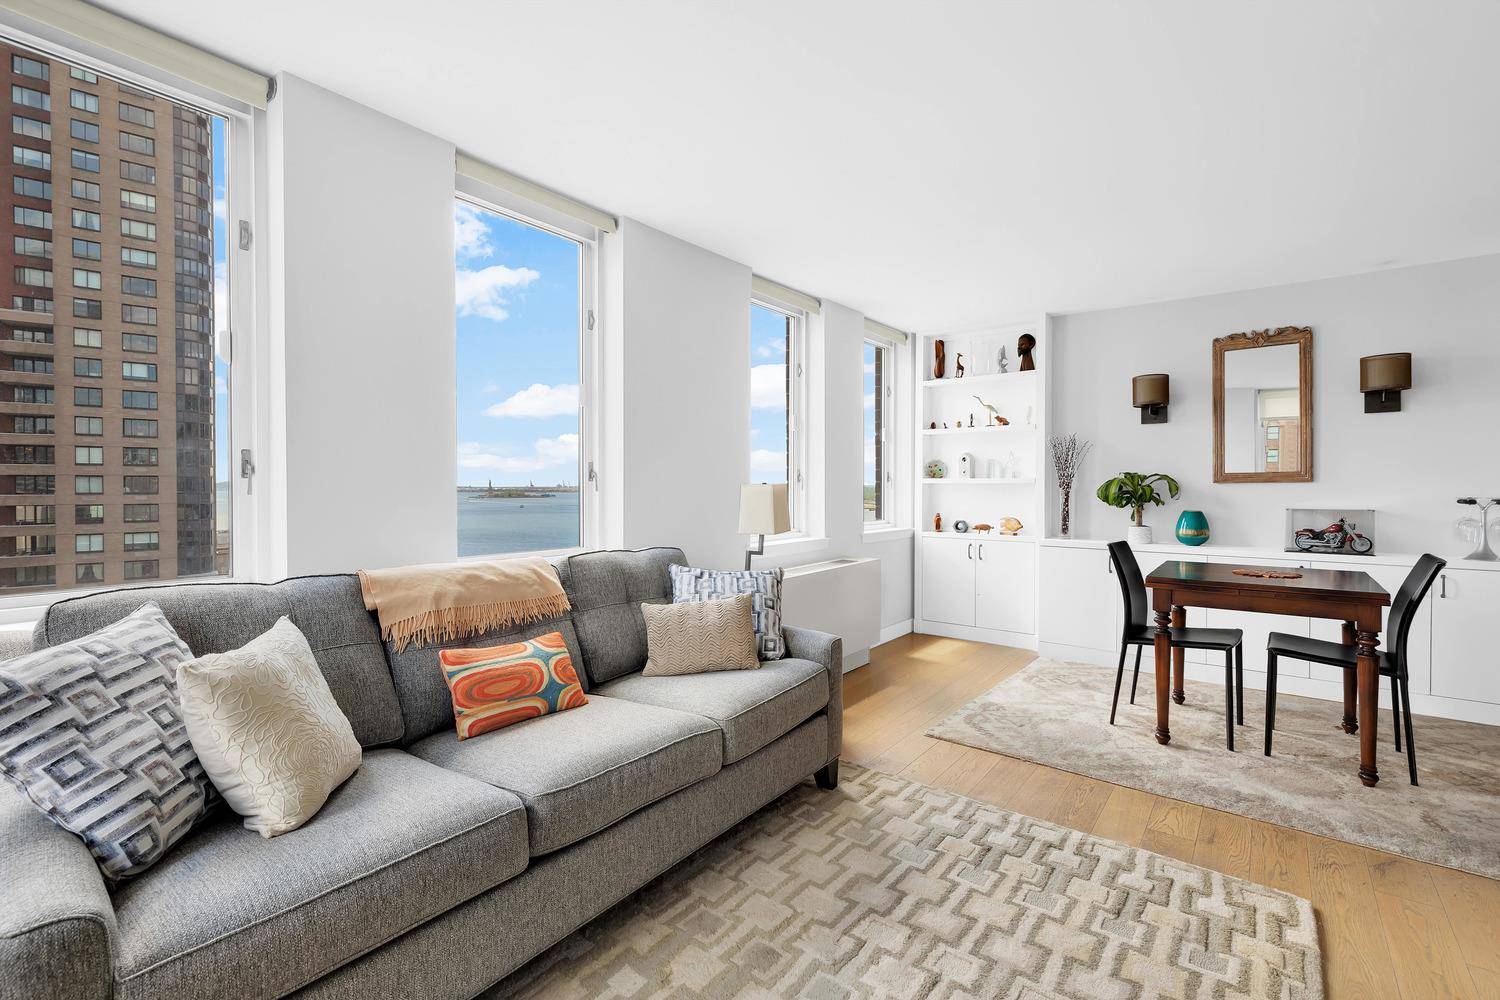 JUST LISTED ! Spectacular Panoramic Views of New York Harbor and the Statue of Liberty.